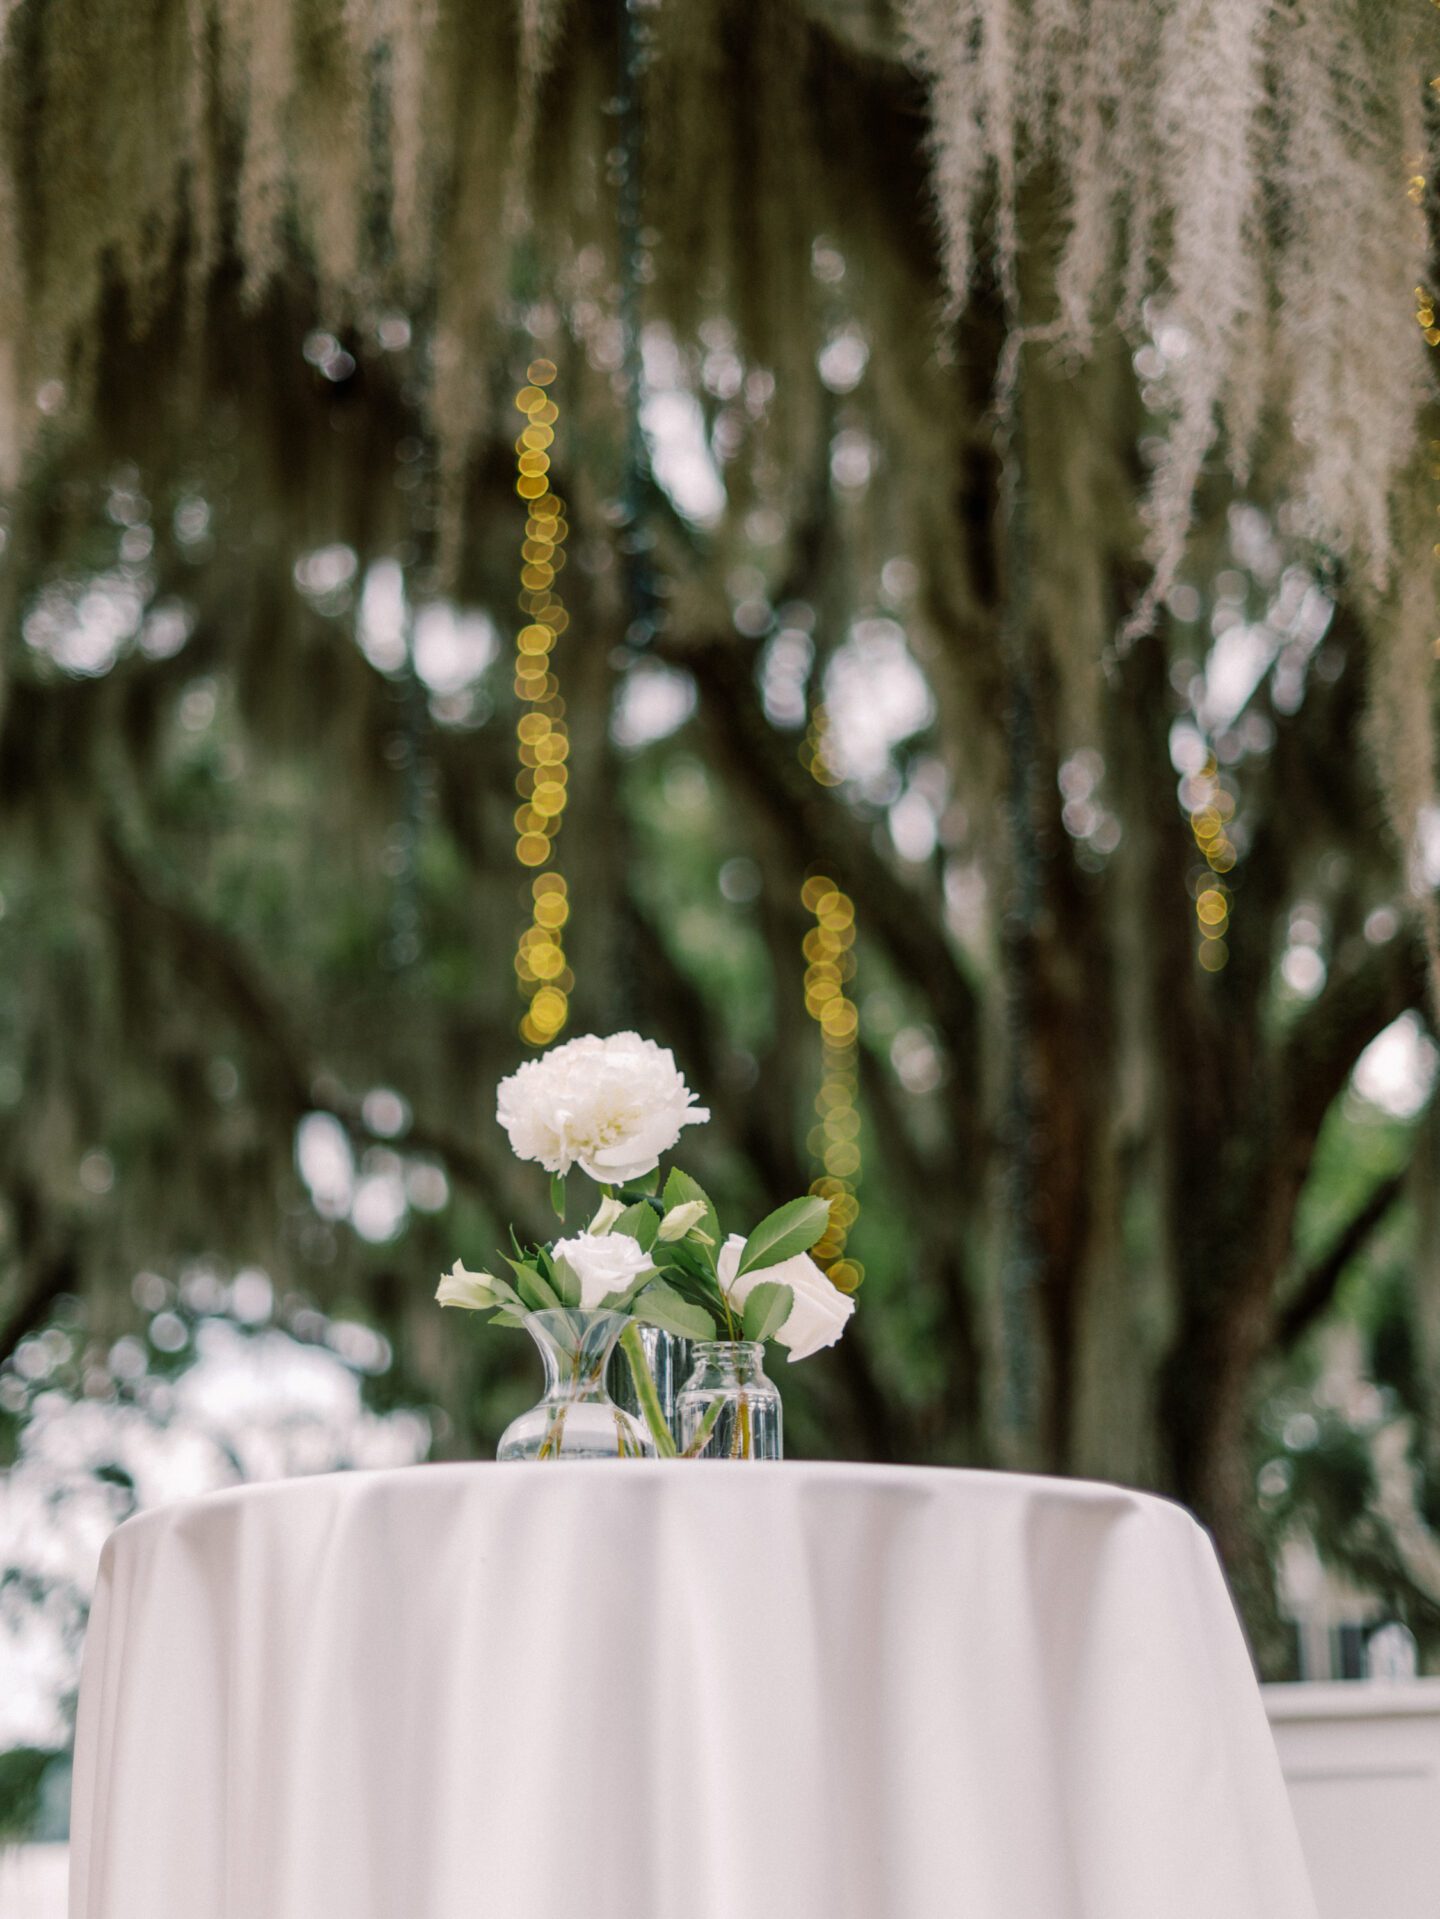 A table with white flowers on it under a spanish moss canopy.